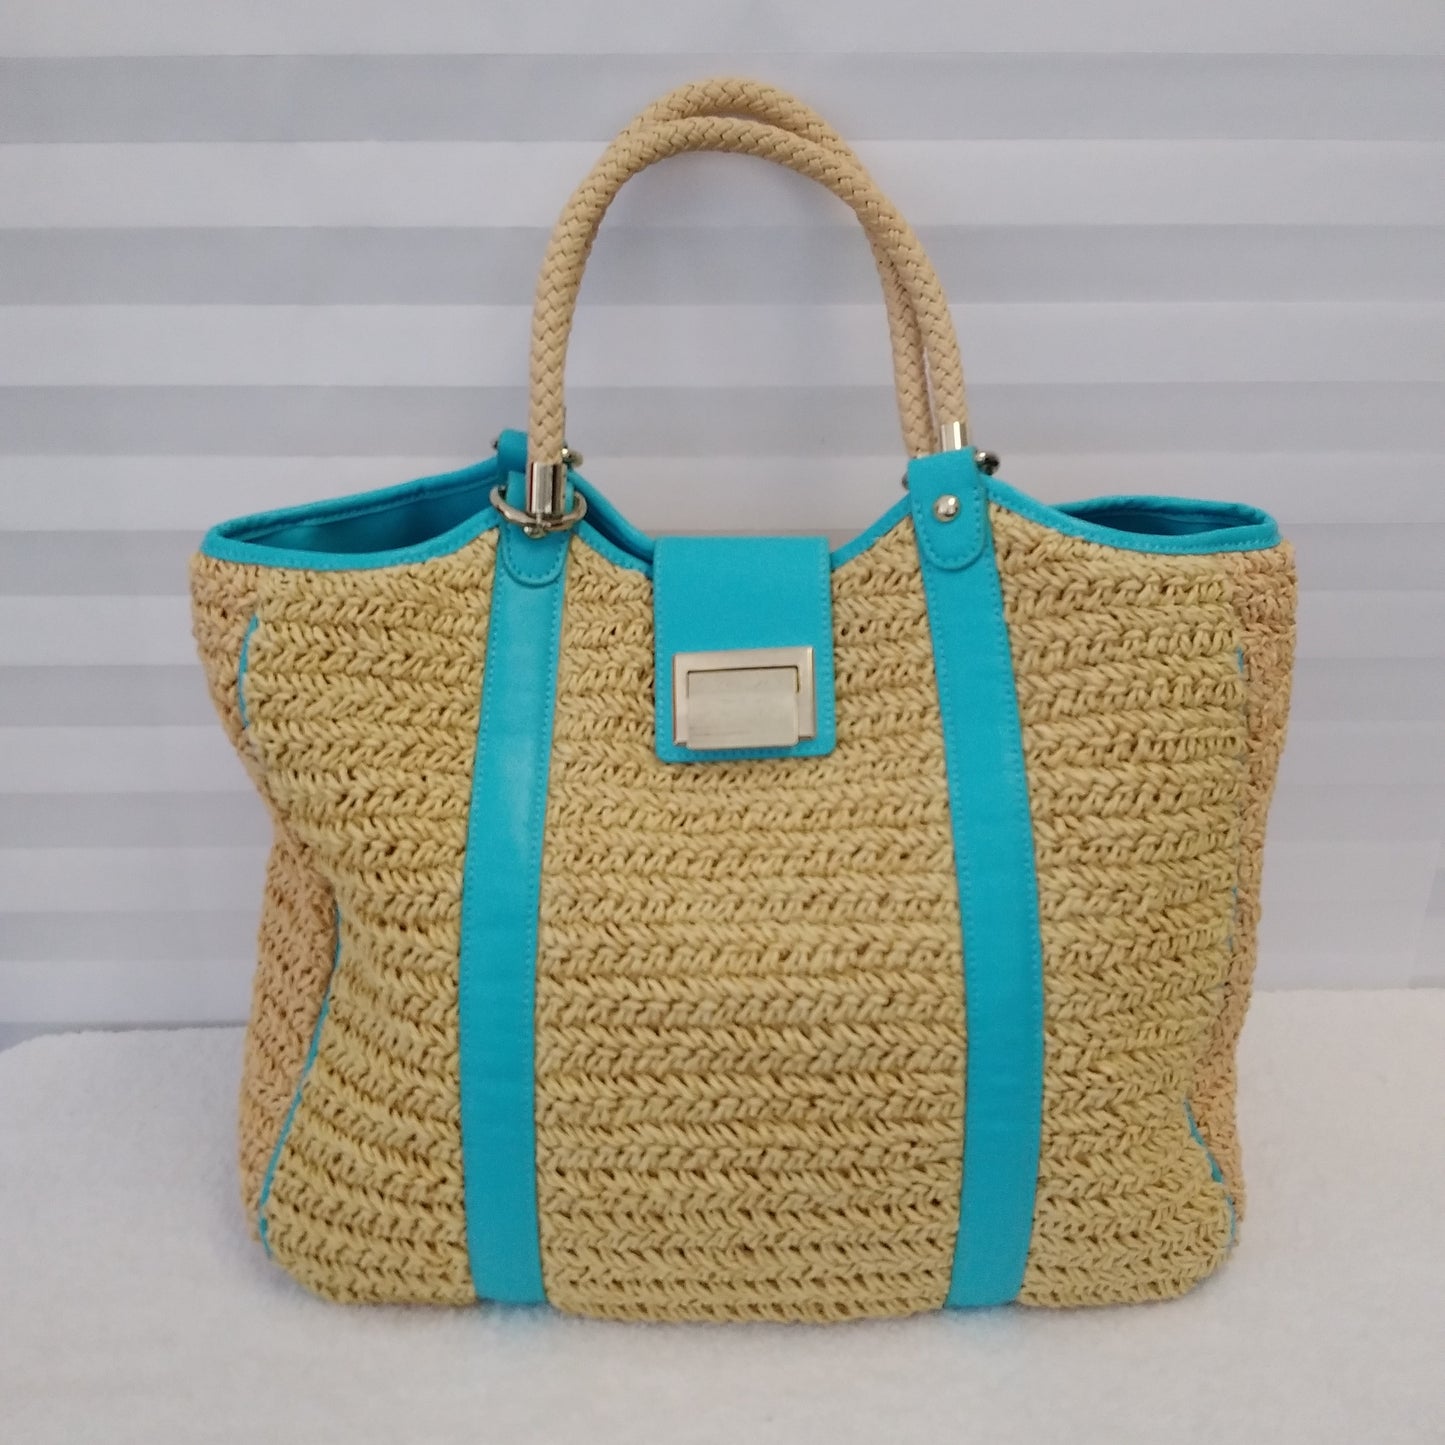 Talbots Large Woven Straw Tote Bag With Teal Leather Trim and Gold Accents